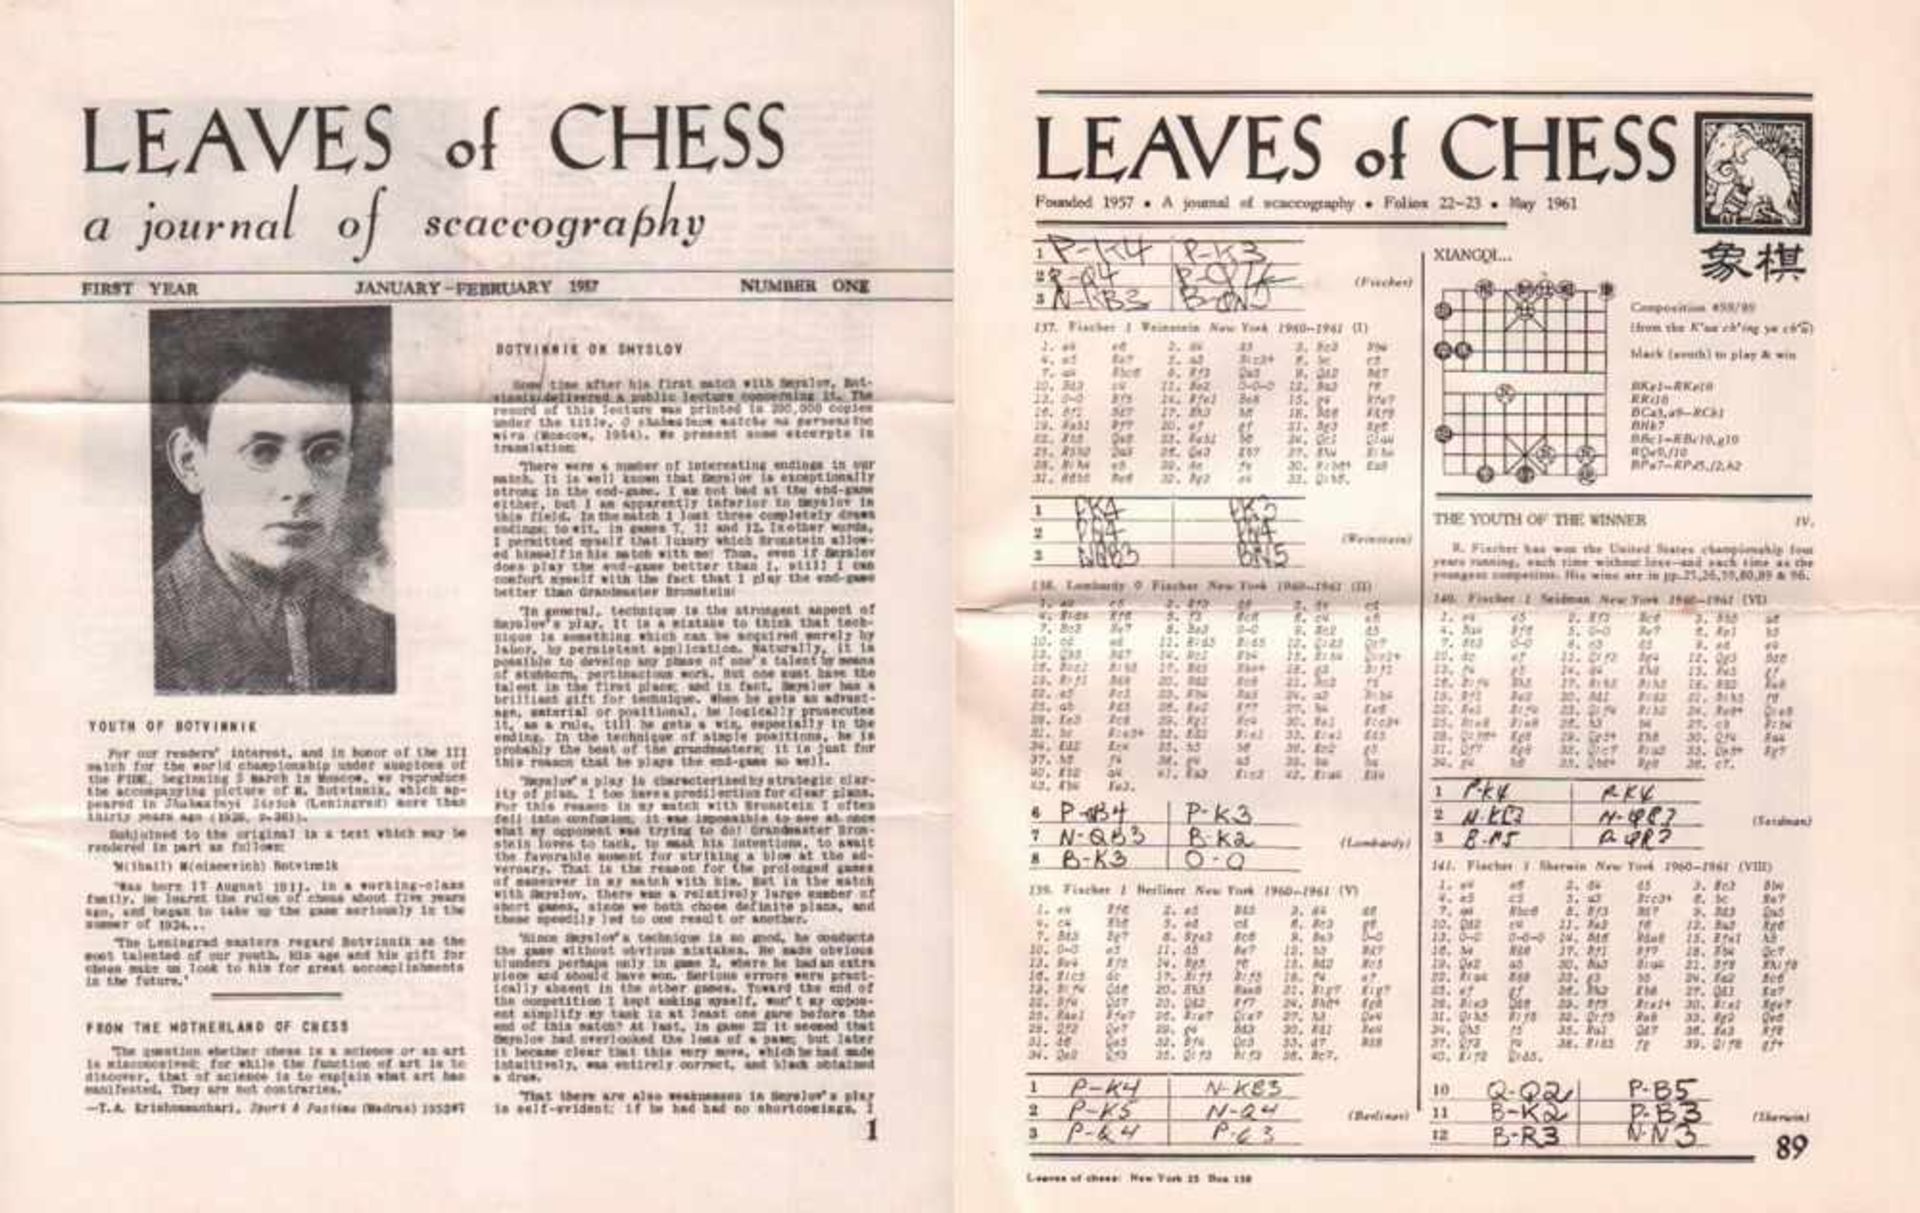 Leaves of Chess a journal of scaccography.Editor: O(rdway) Southard. New York 1957 - 1961. 4°. Mit